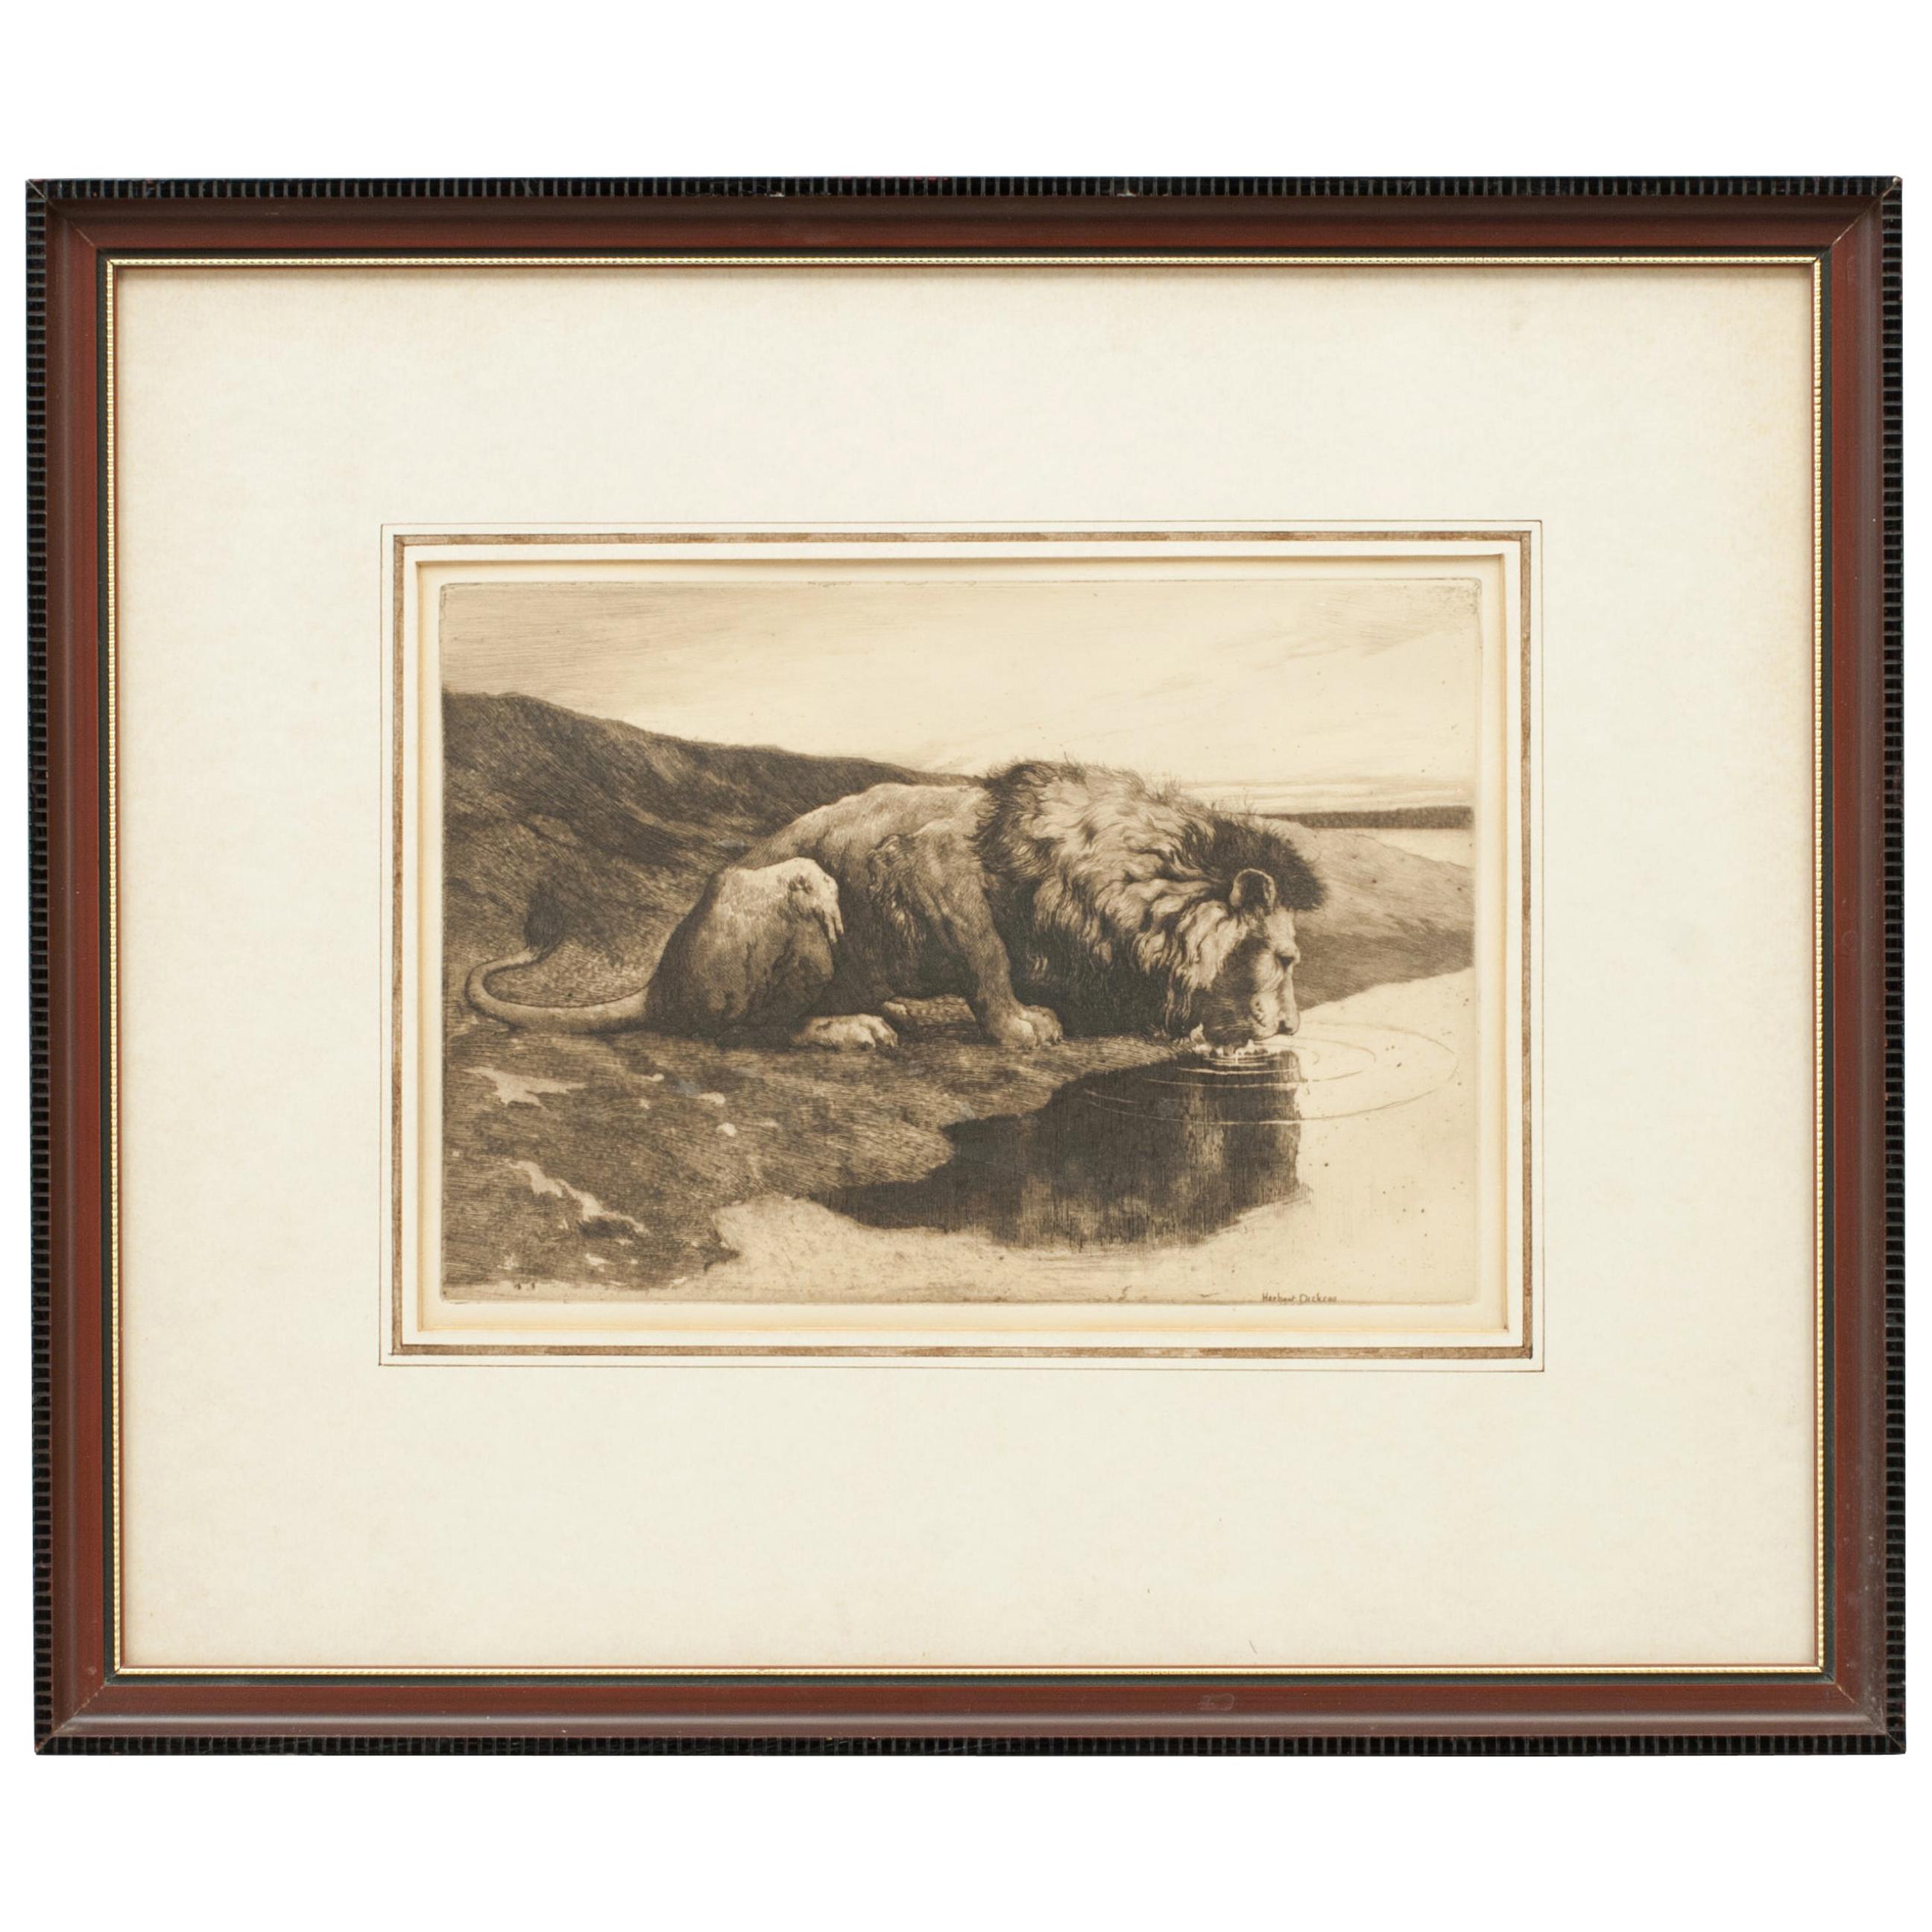 Antique Etching by Herbert Dicksee 'A Drinking Lion'